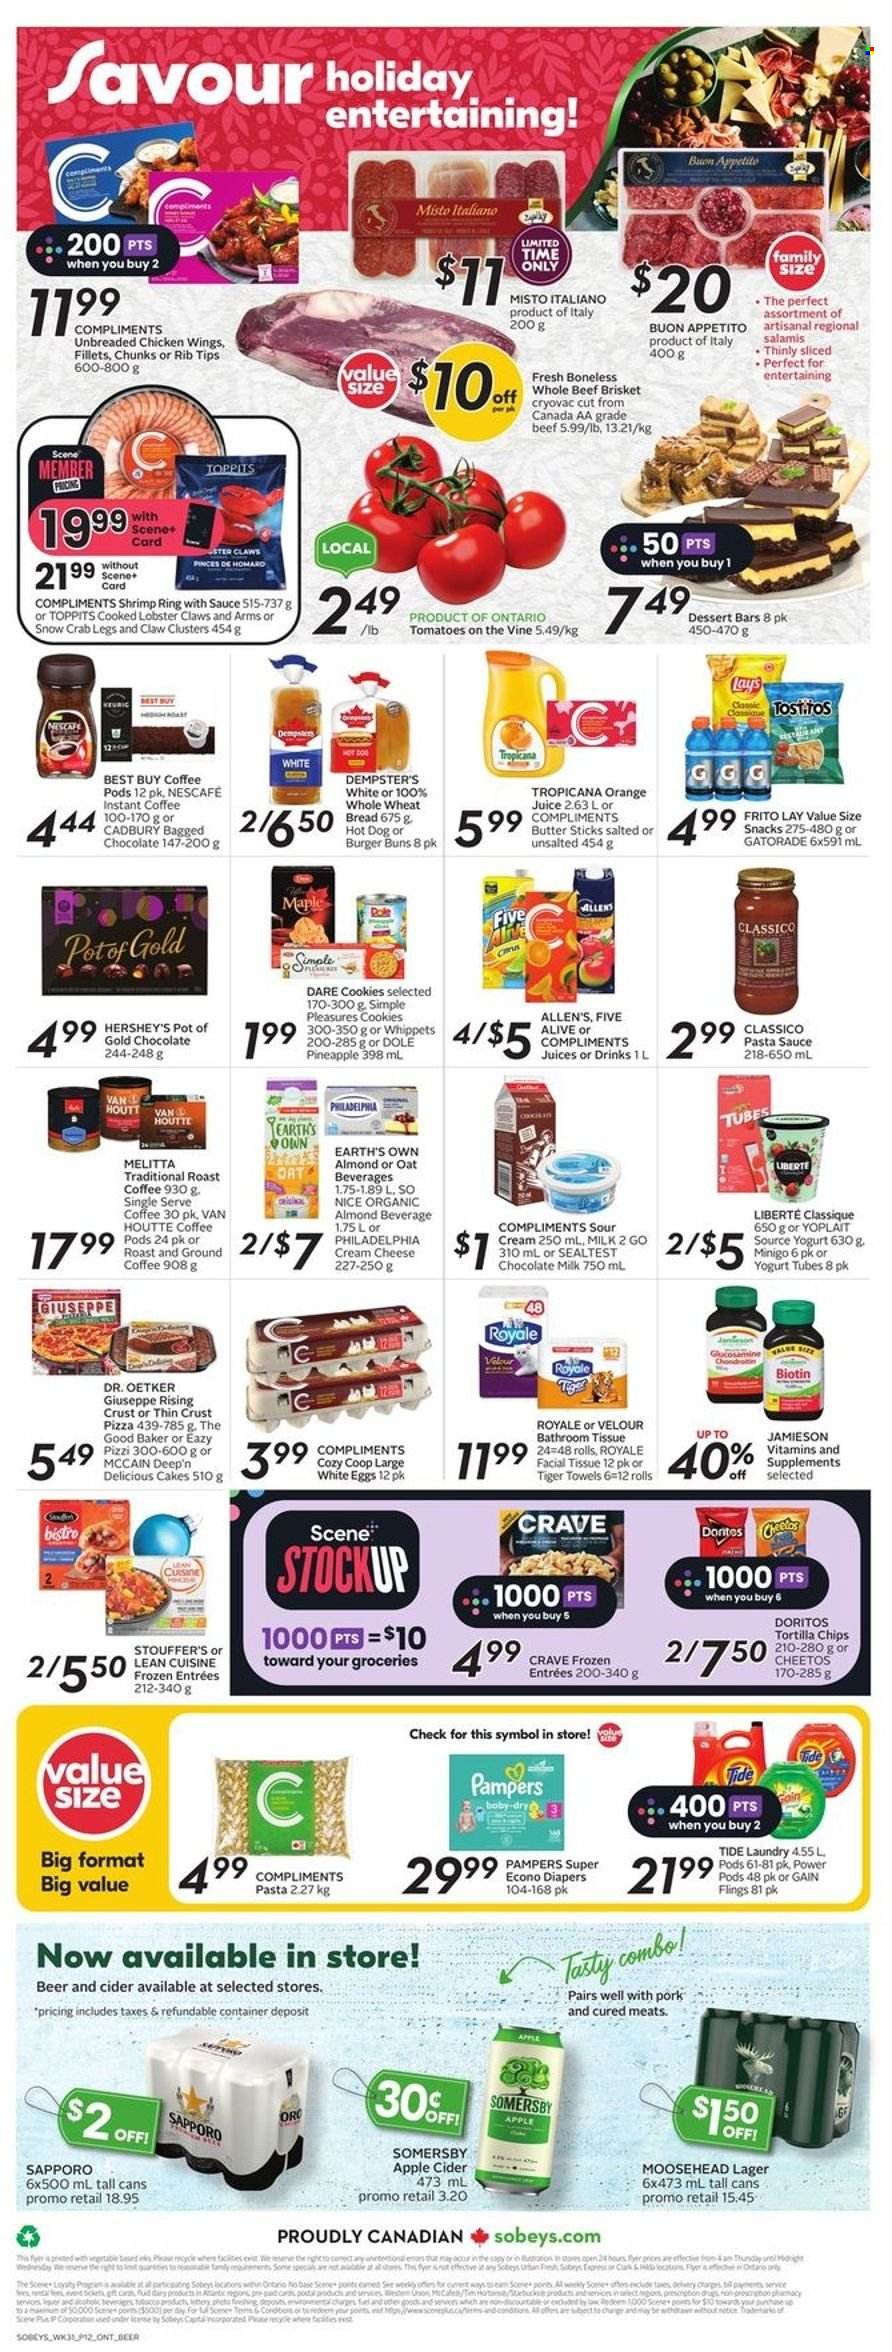 thumbnail - Sobeys Flyer - December 01, 2022 - December 07, 2022 - Sales products - wheat bread, cake, burger buns, Dole, pineapple, lobster, crab legs, crab, shrimps, hot dog, pizza, pasta sauce, Lean Cuisine, cream cheese, Dr. Oetker, yoghurt, Yoplait, milk, eggs, butter, sour cream, Hershey's, chicken wings, Stouffer's, McCain, cookies, milk chocolate, chocolate, snack, Cadbury, Doritos, tortilla chips, Cheetos, Lay’s, Tostitos, Classico, orange juice, juice, Gatorade, coffee, coffee pods, instant coffee, ground coffee, So Nice, apple cider, cider, beer, Lager, beef meat, beef brisket, nappies, bath tissue, Gain, Tide, pot, container, Biotin, glucosamine, Philadelphia, Pampers, Nescafé. Page 2.